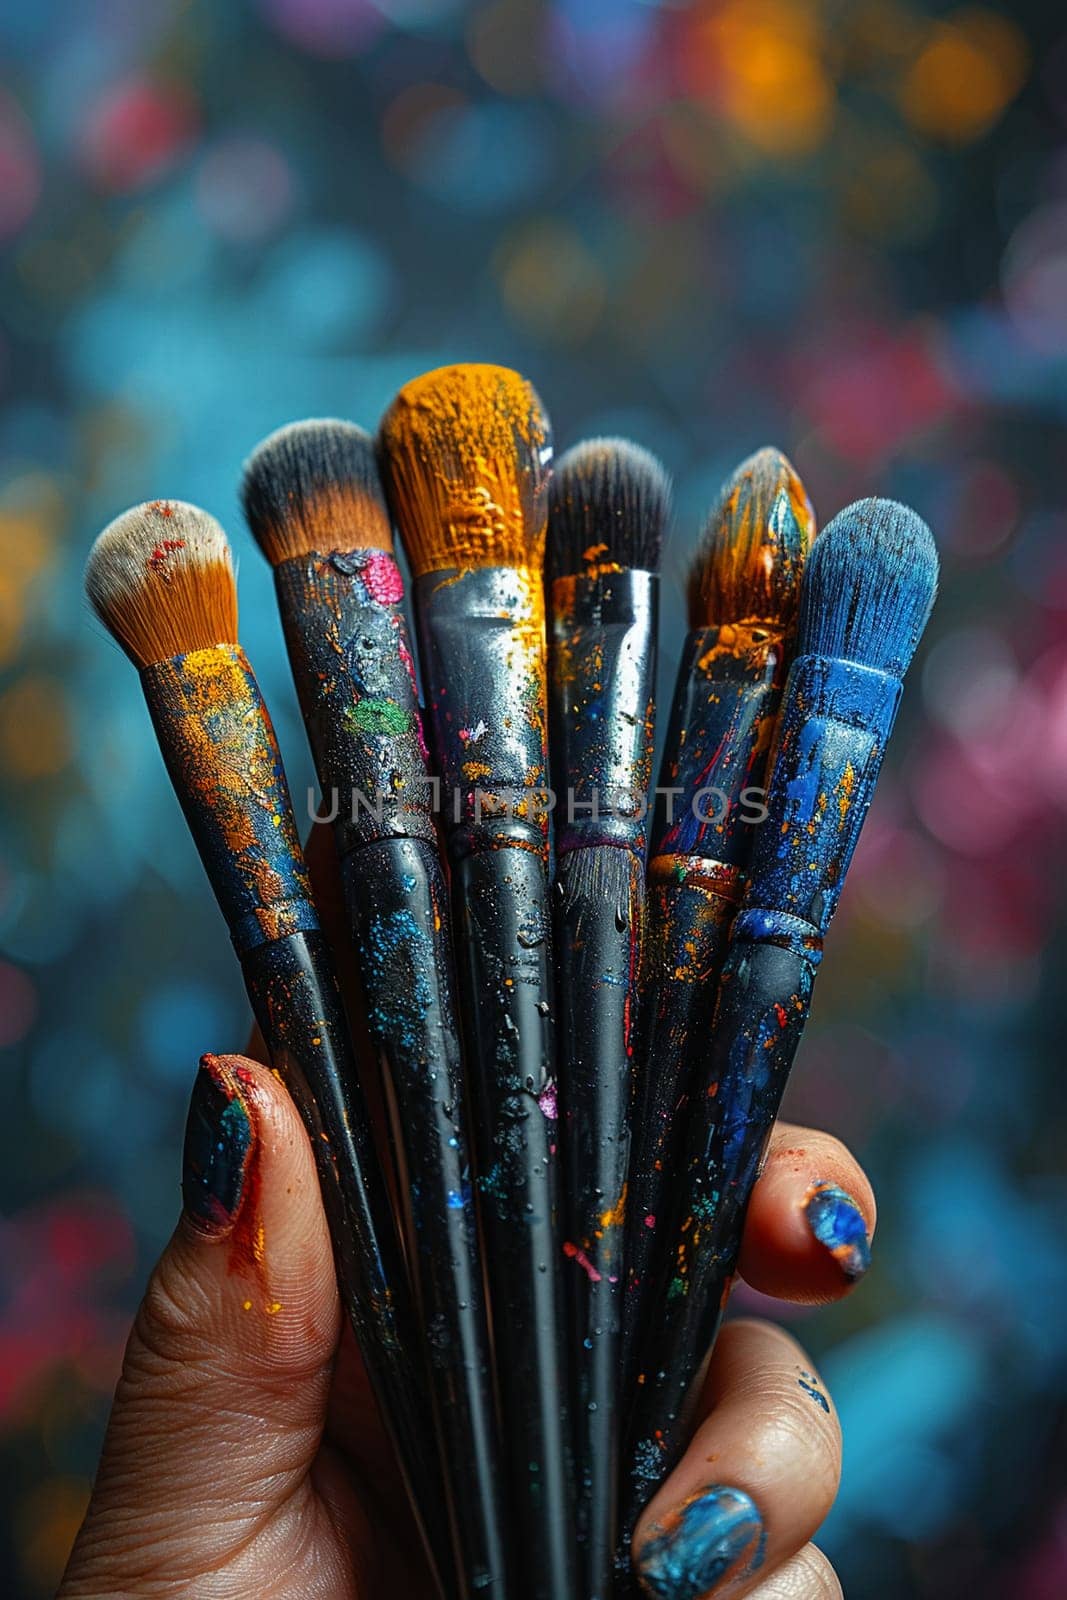 Hand holding a collection of makeup brushes, symbolizing artistry and beauty tools.